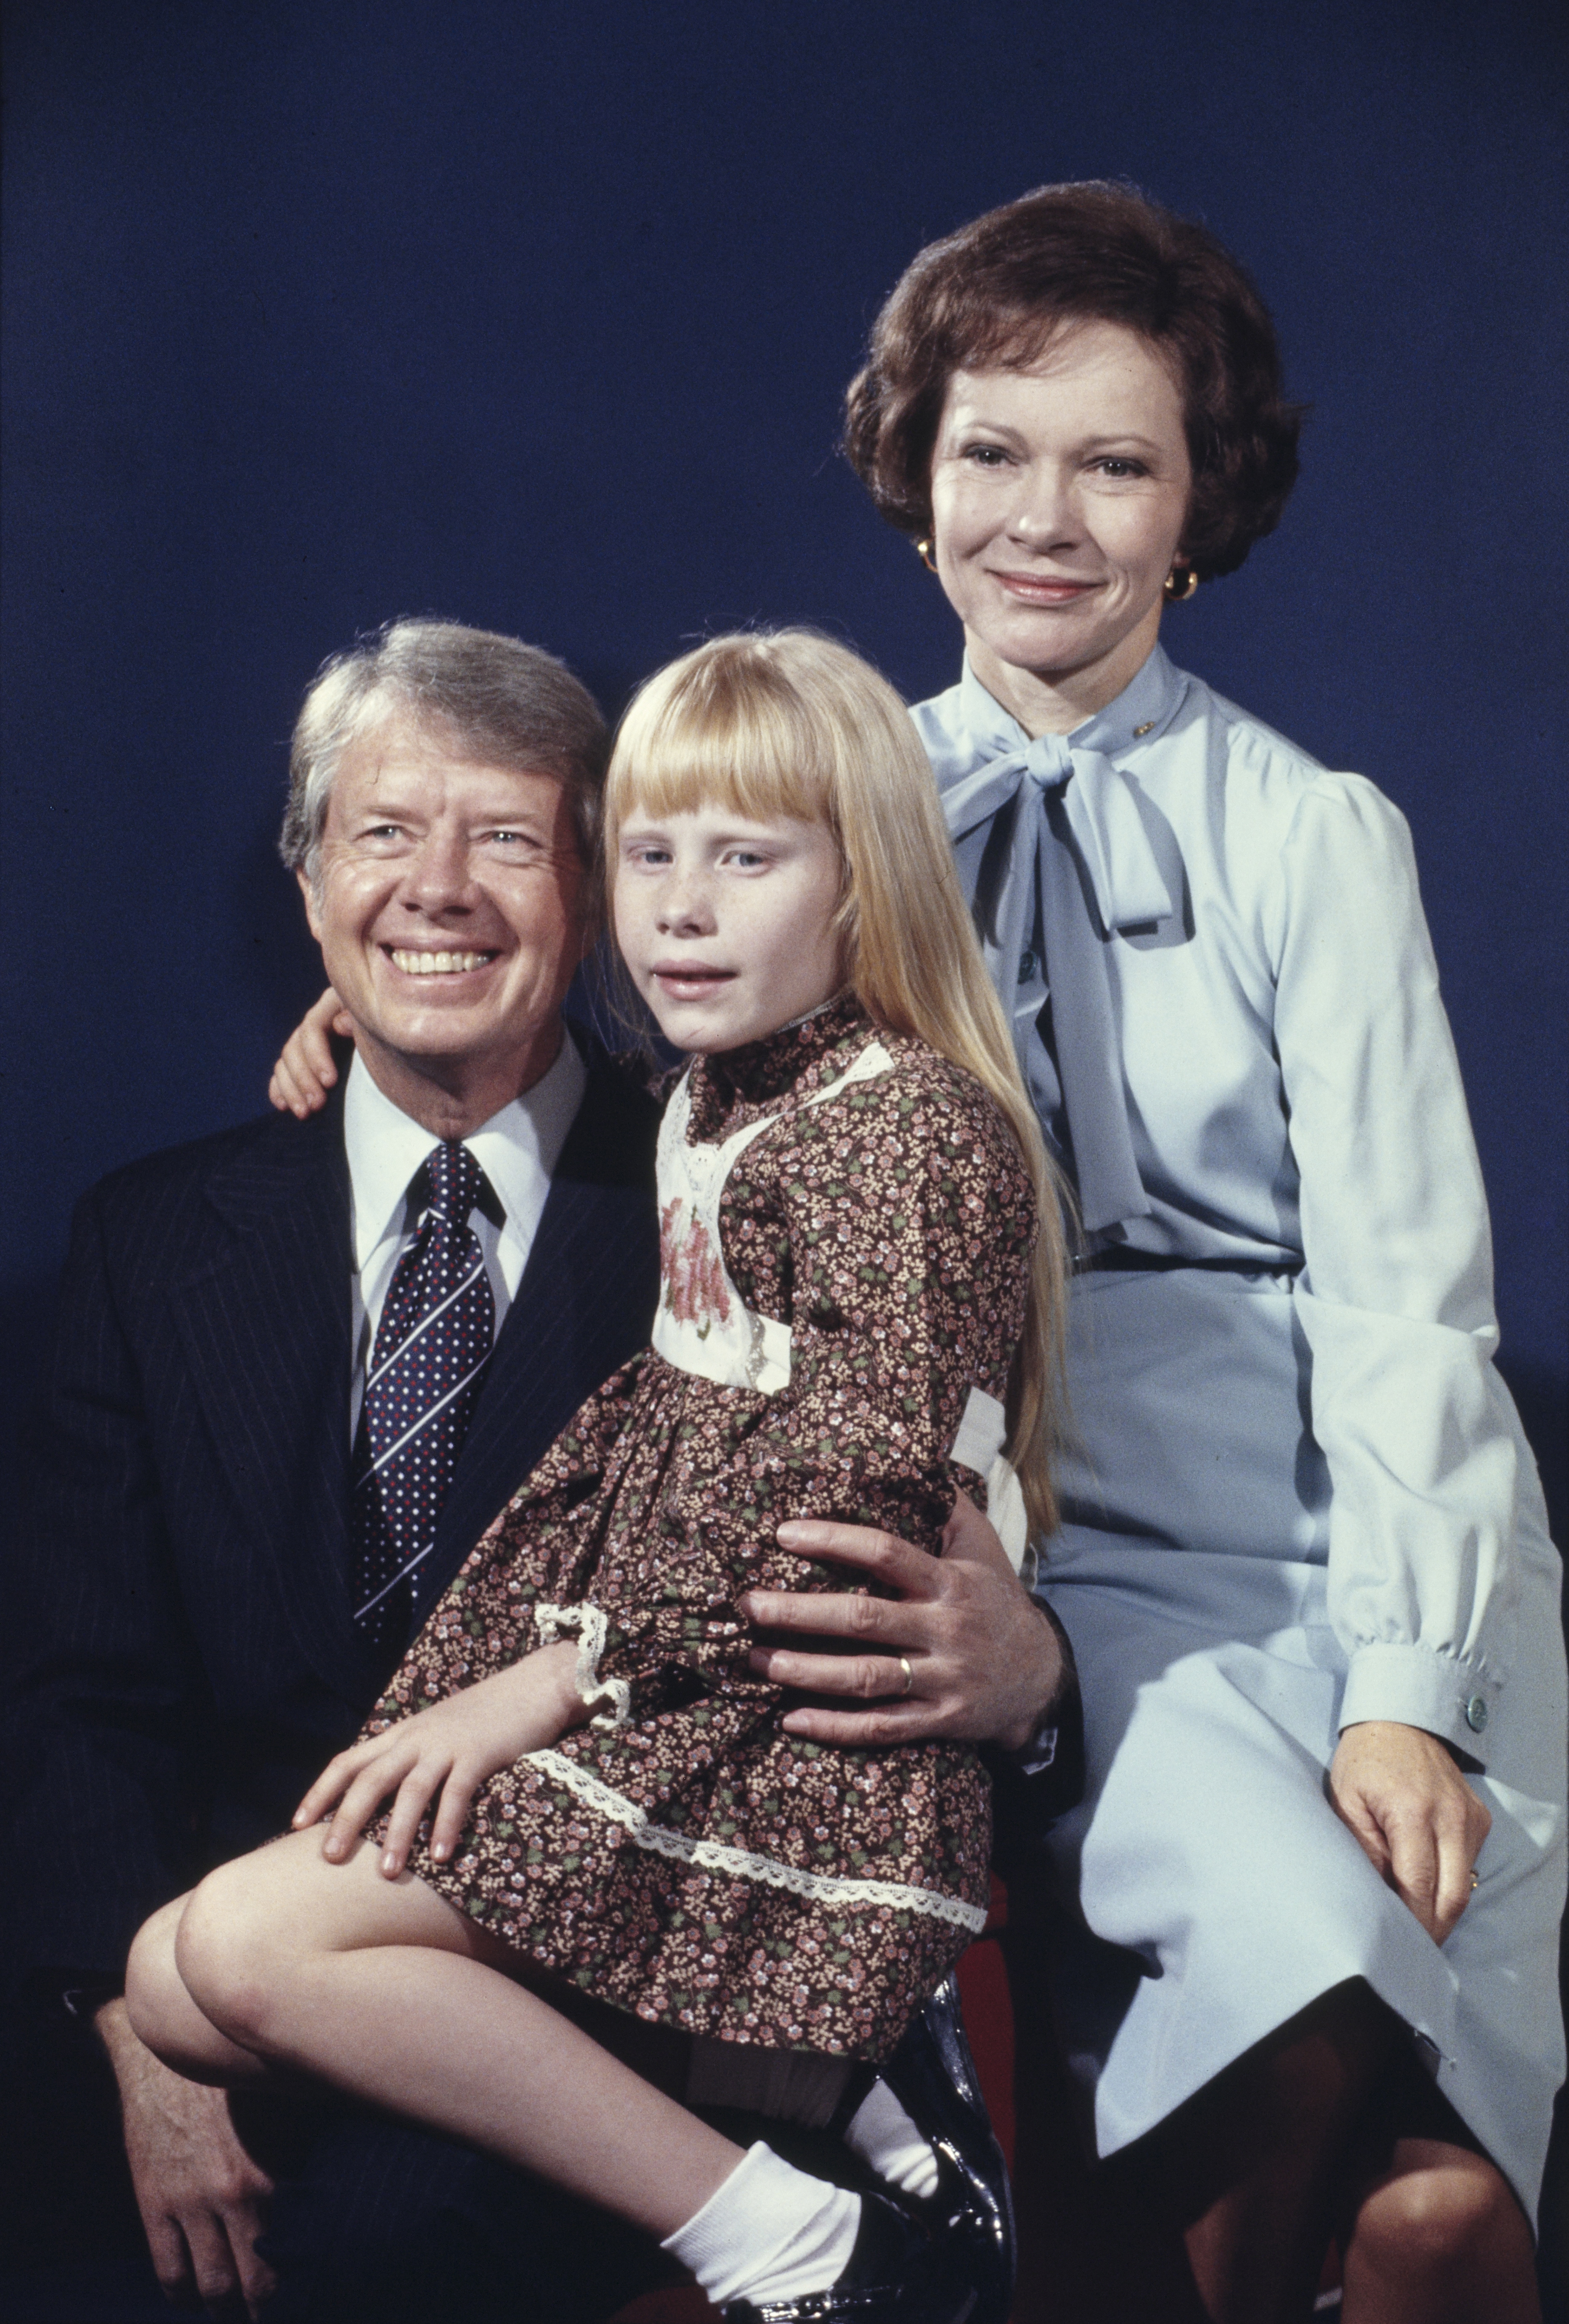 Jimmy, Rosalynn, and Amy Carter pose for an official family photograph in Plains, Georgia, on December 5, 1976. | Source: Getty Images